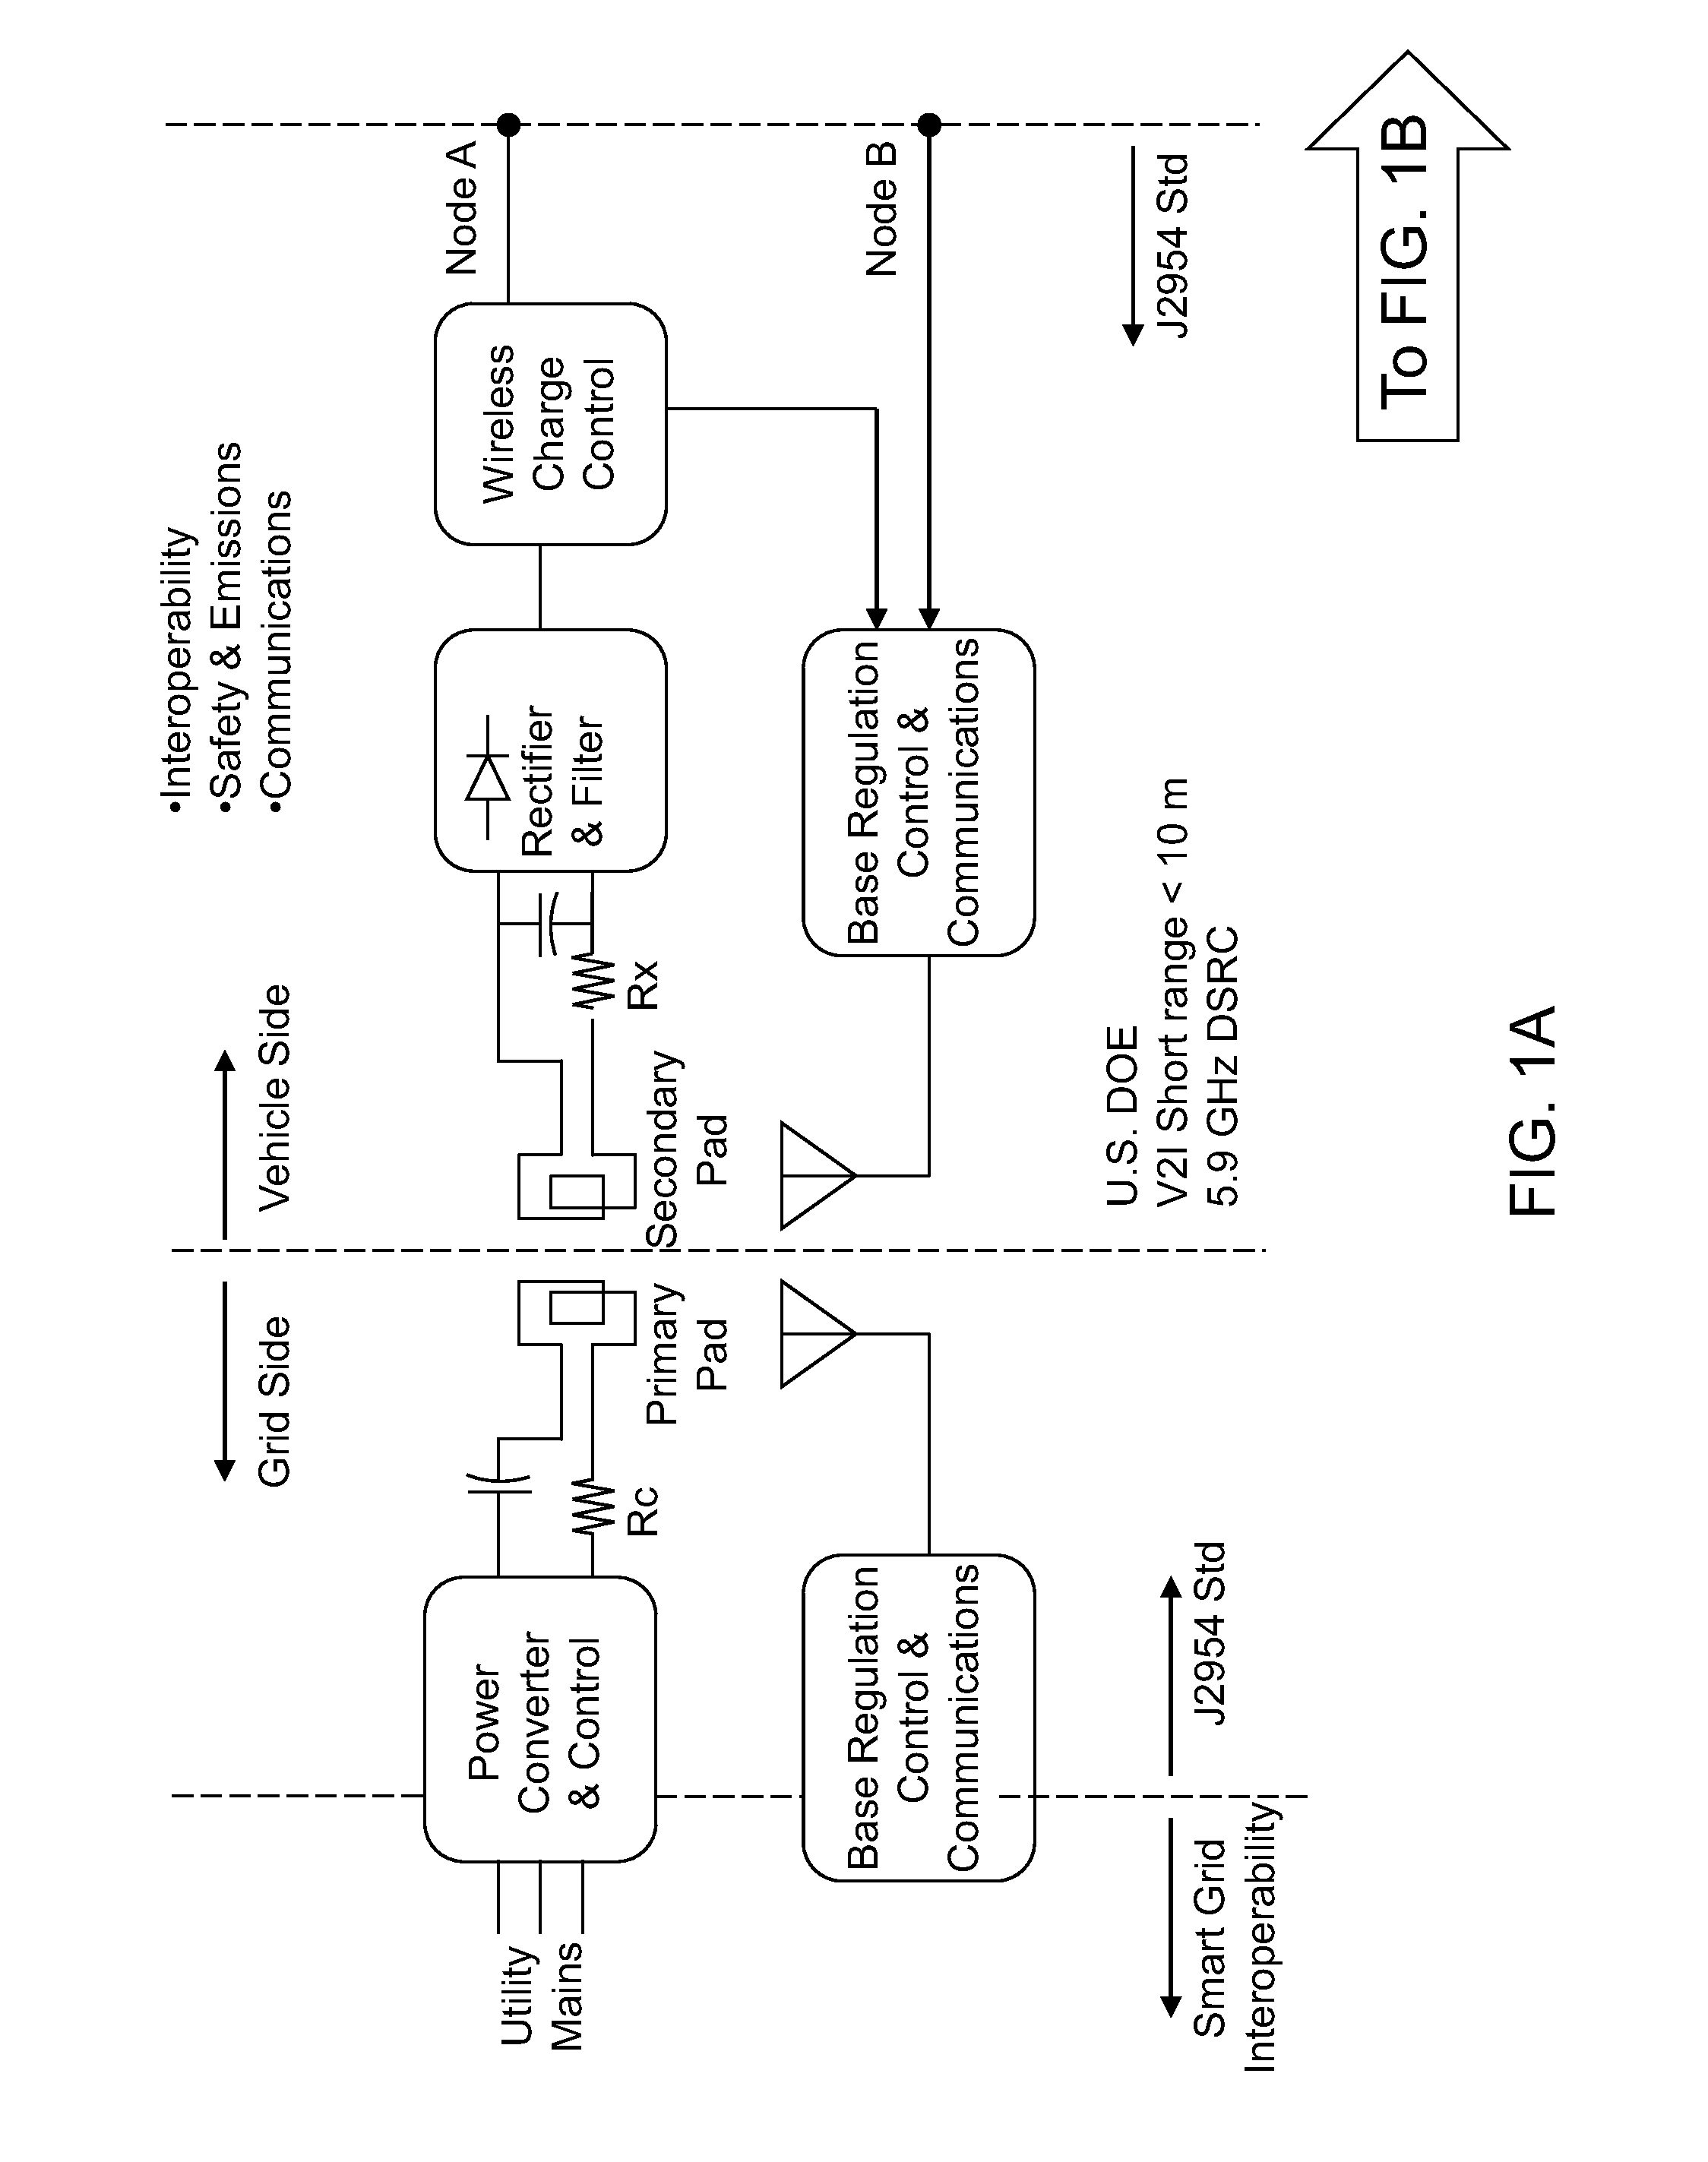 Wireless power transfer electric vehicle supply equipment installation and validation tool